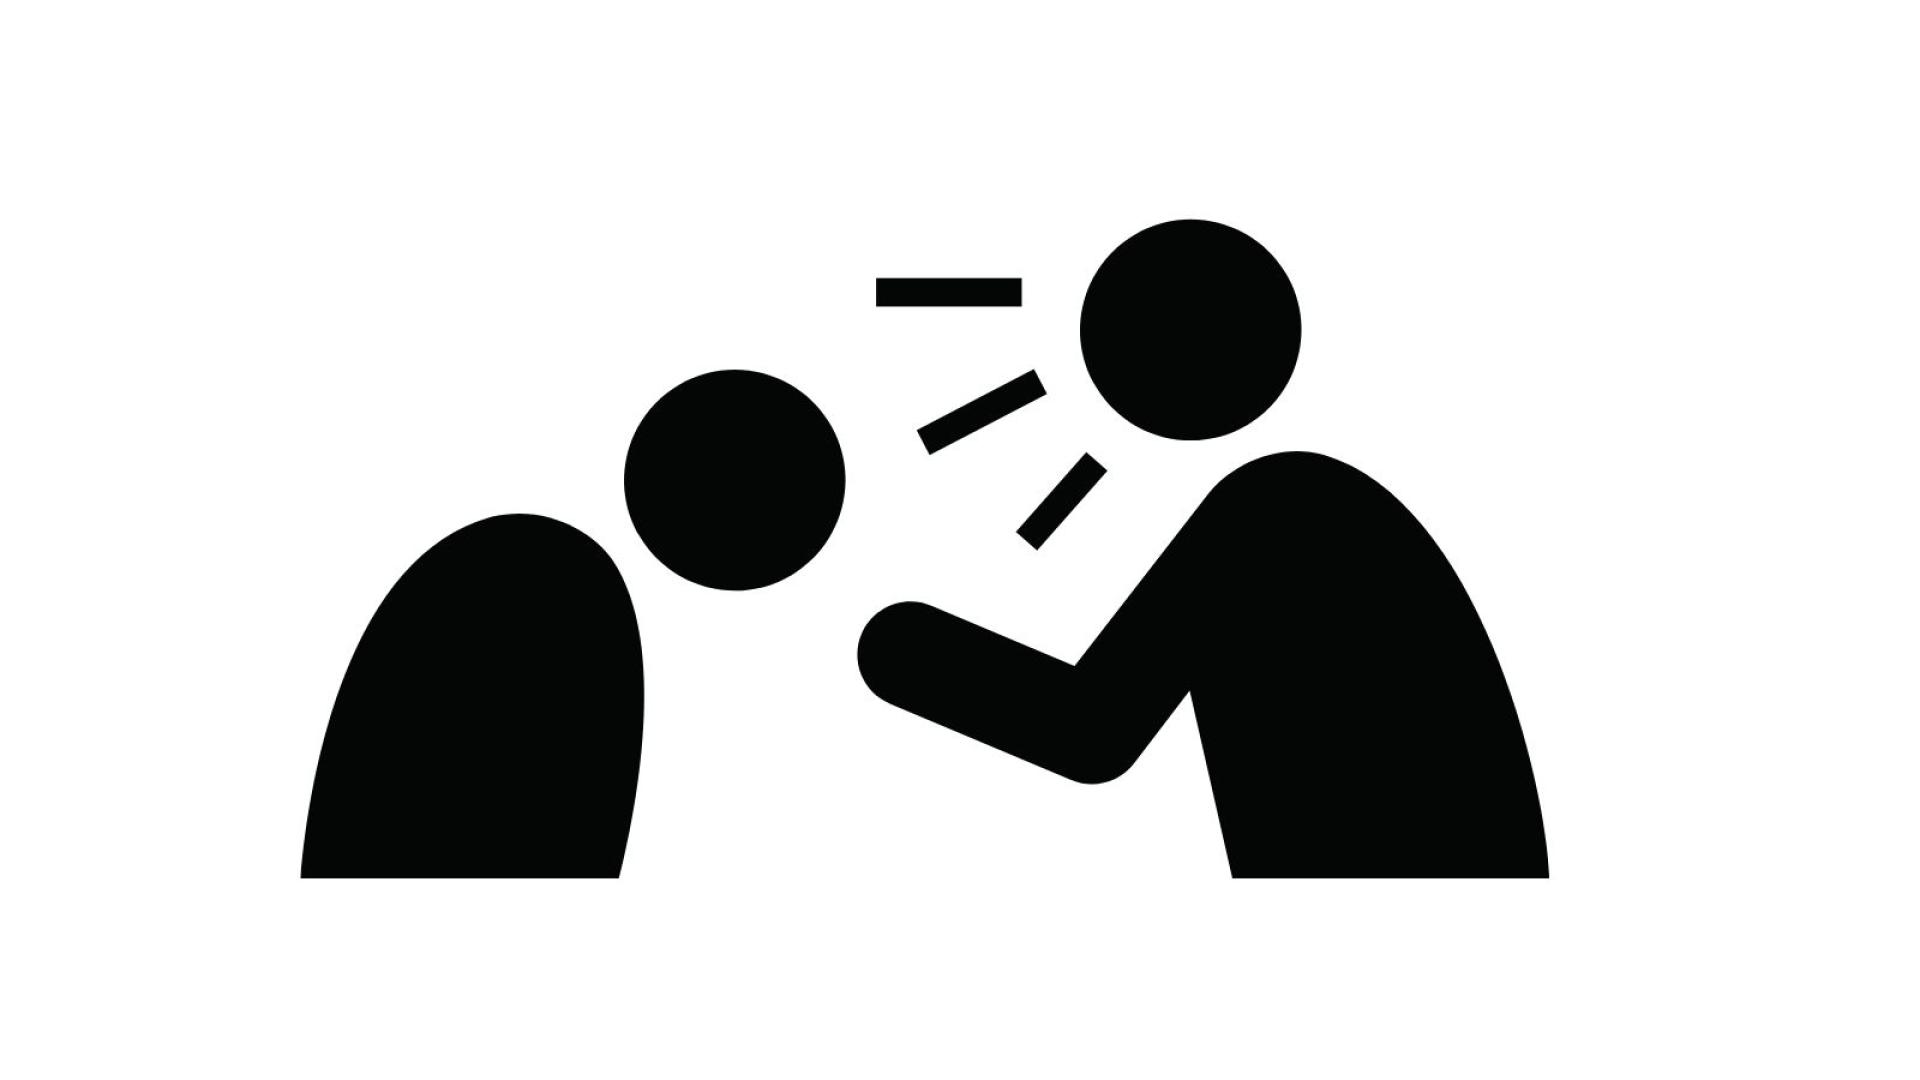 Back and white graphic of person yelling at another person who is cowering.